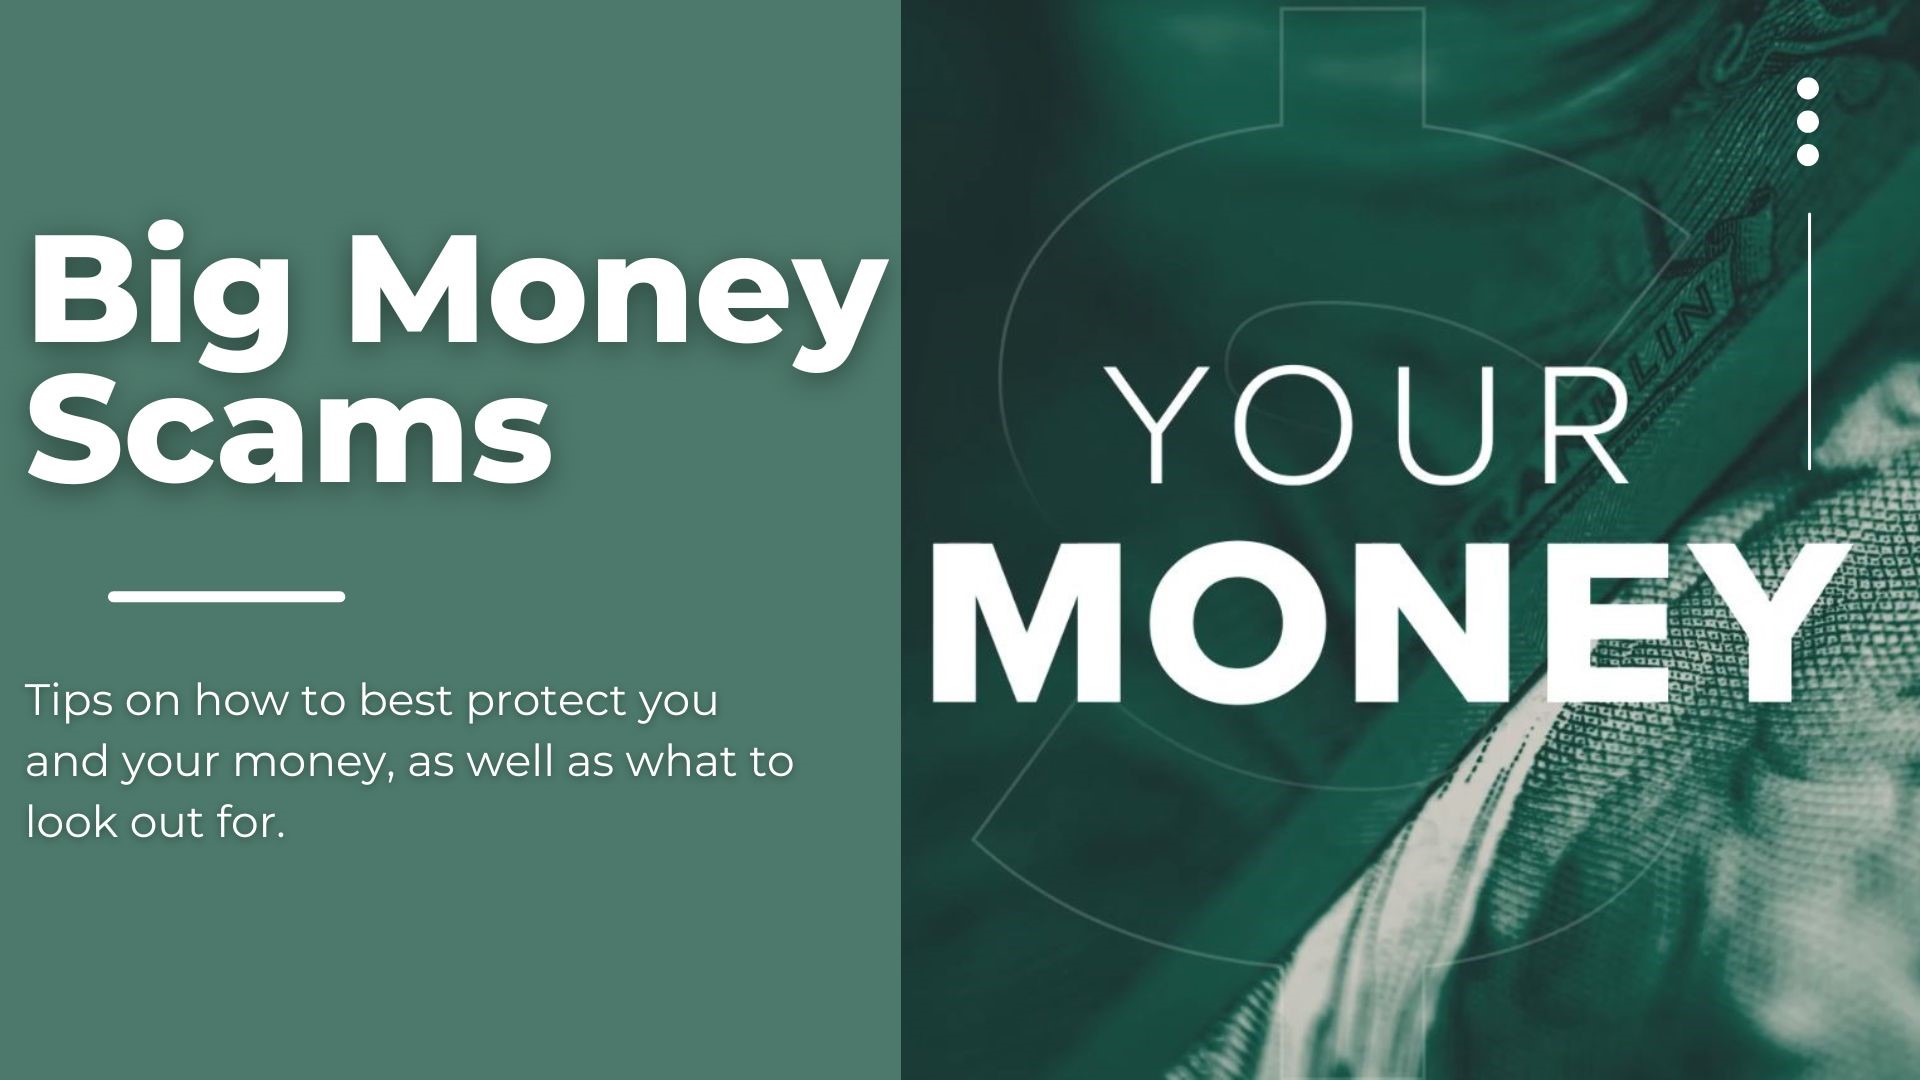 Looking at scams and schemes thieves use to steal your money and what you can do to protect yourself.